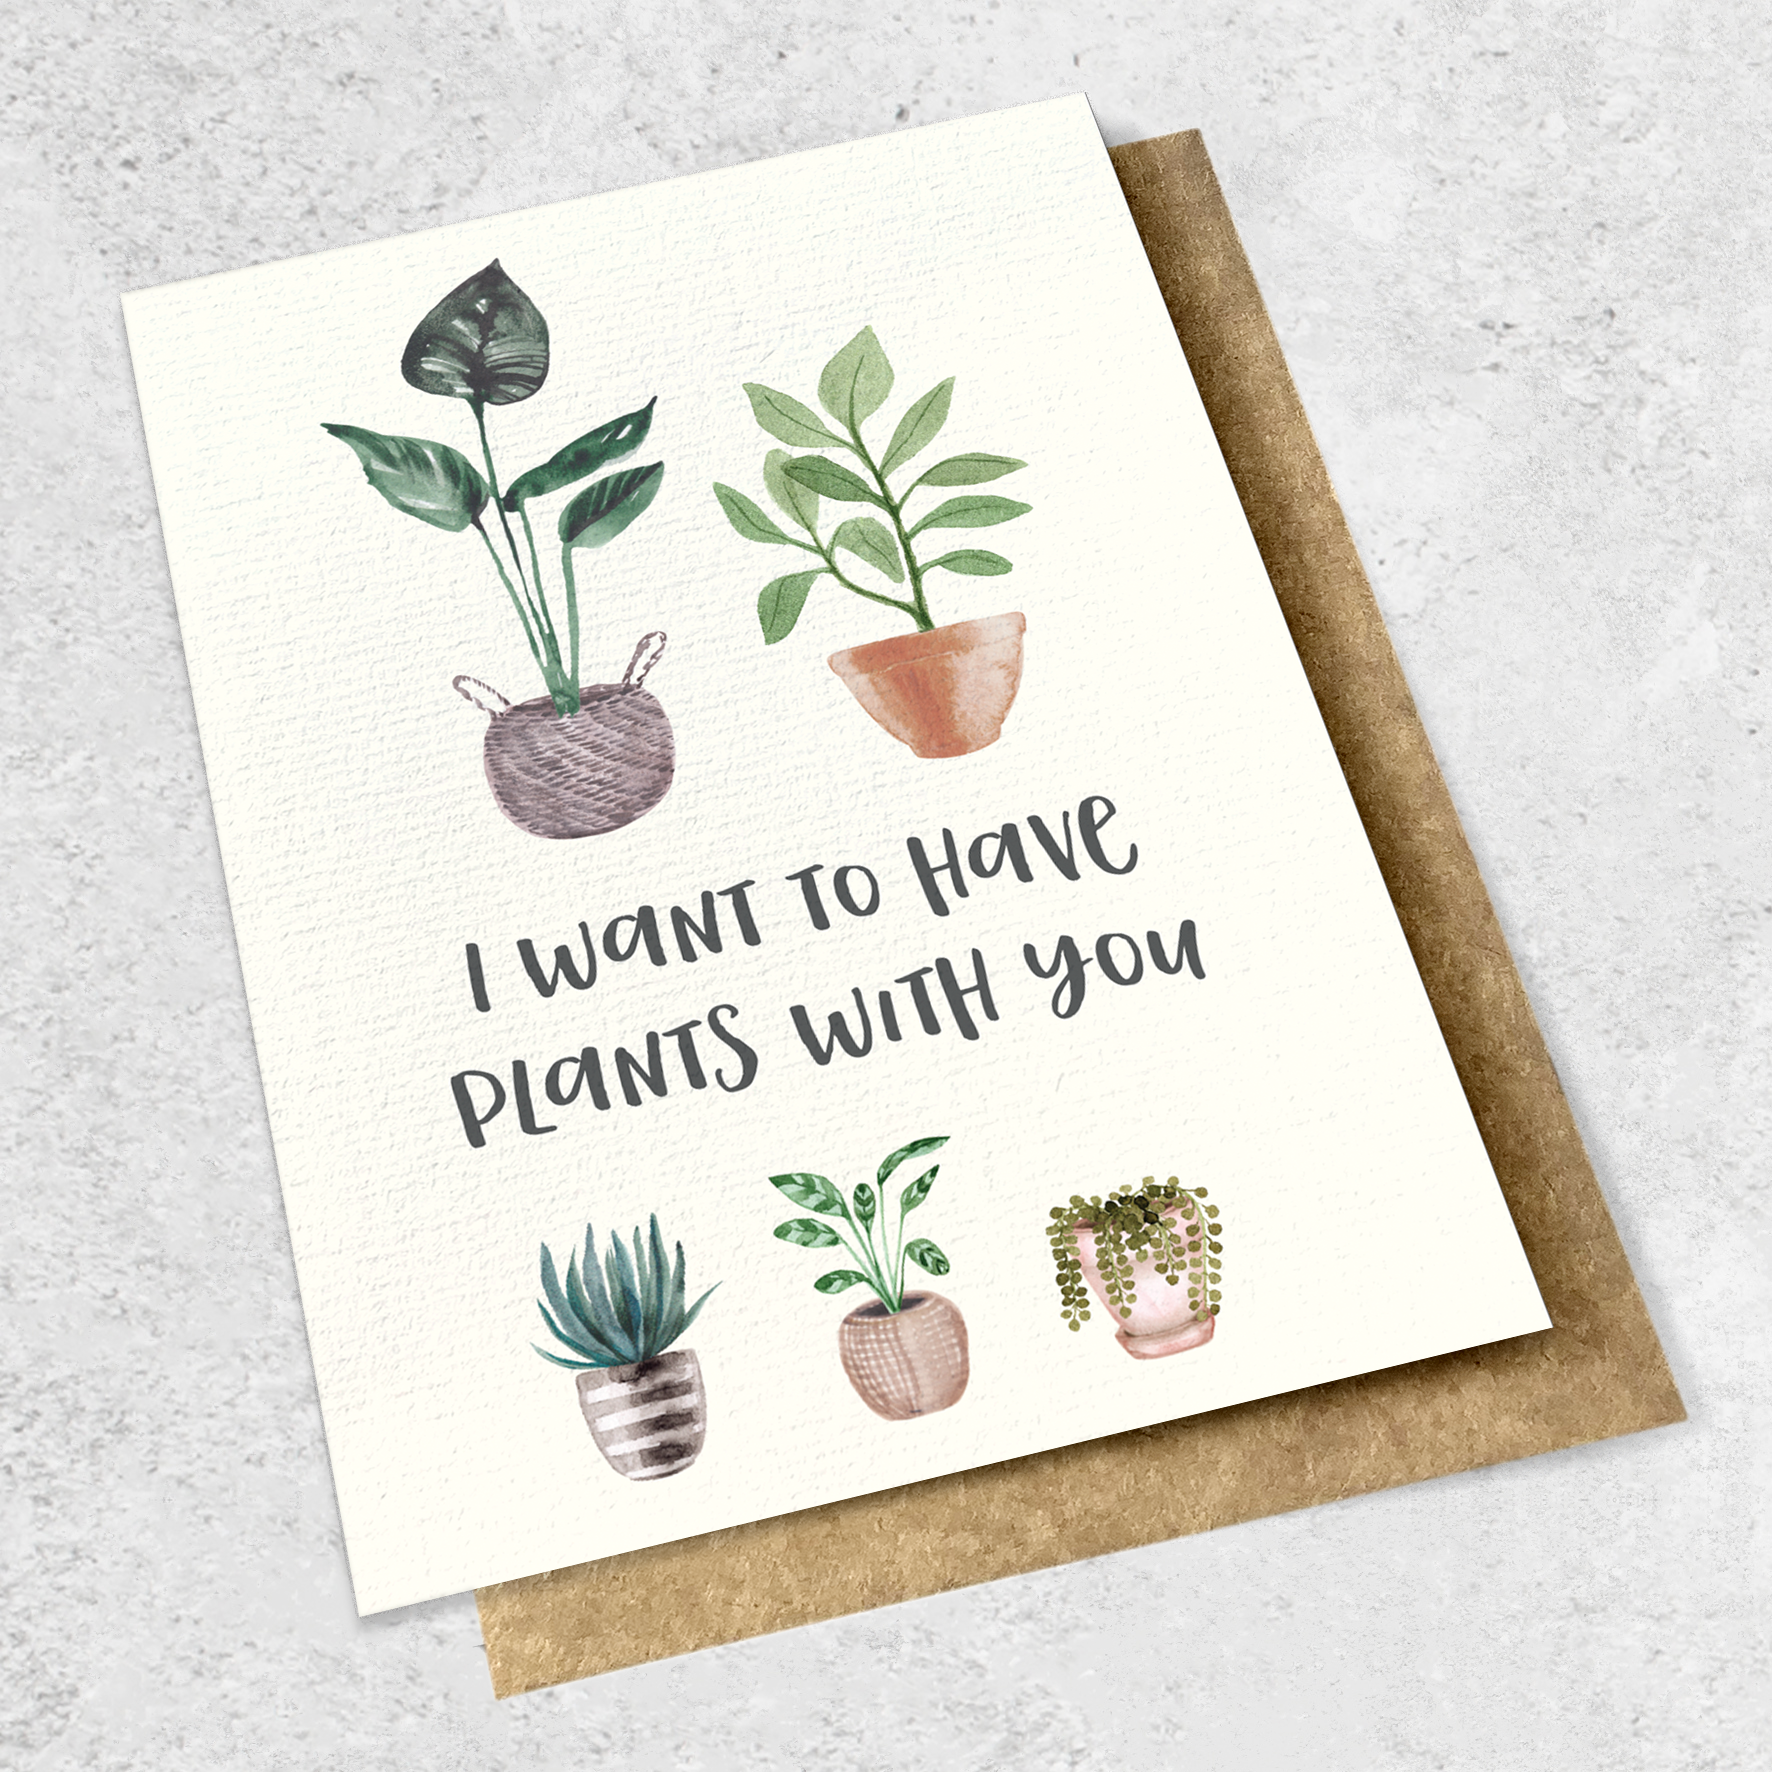 i want to have plants with you